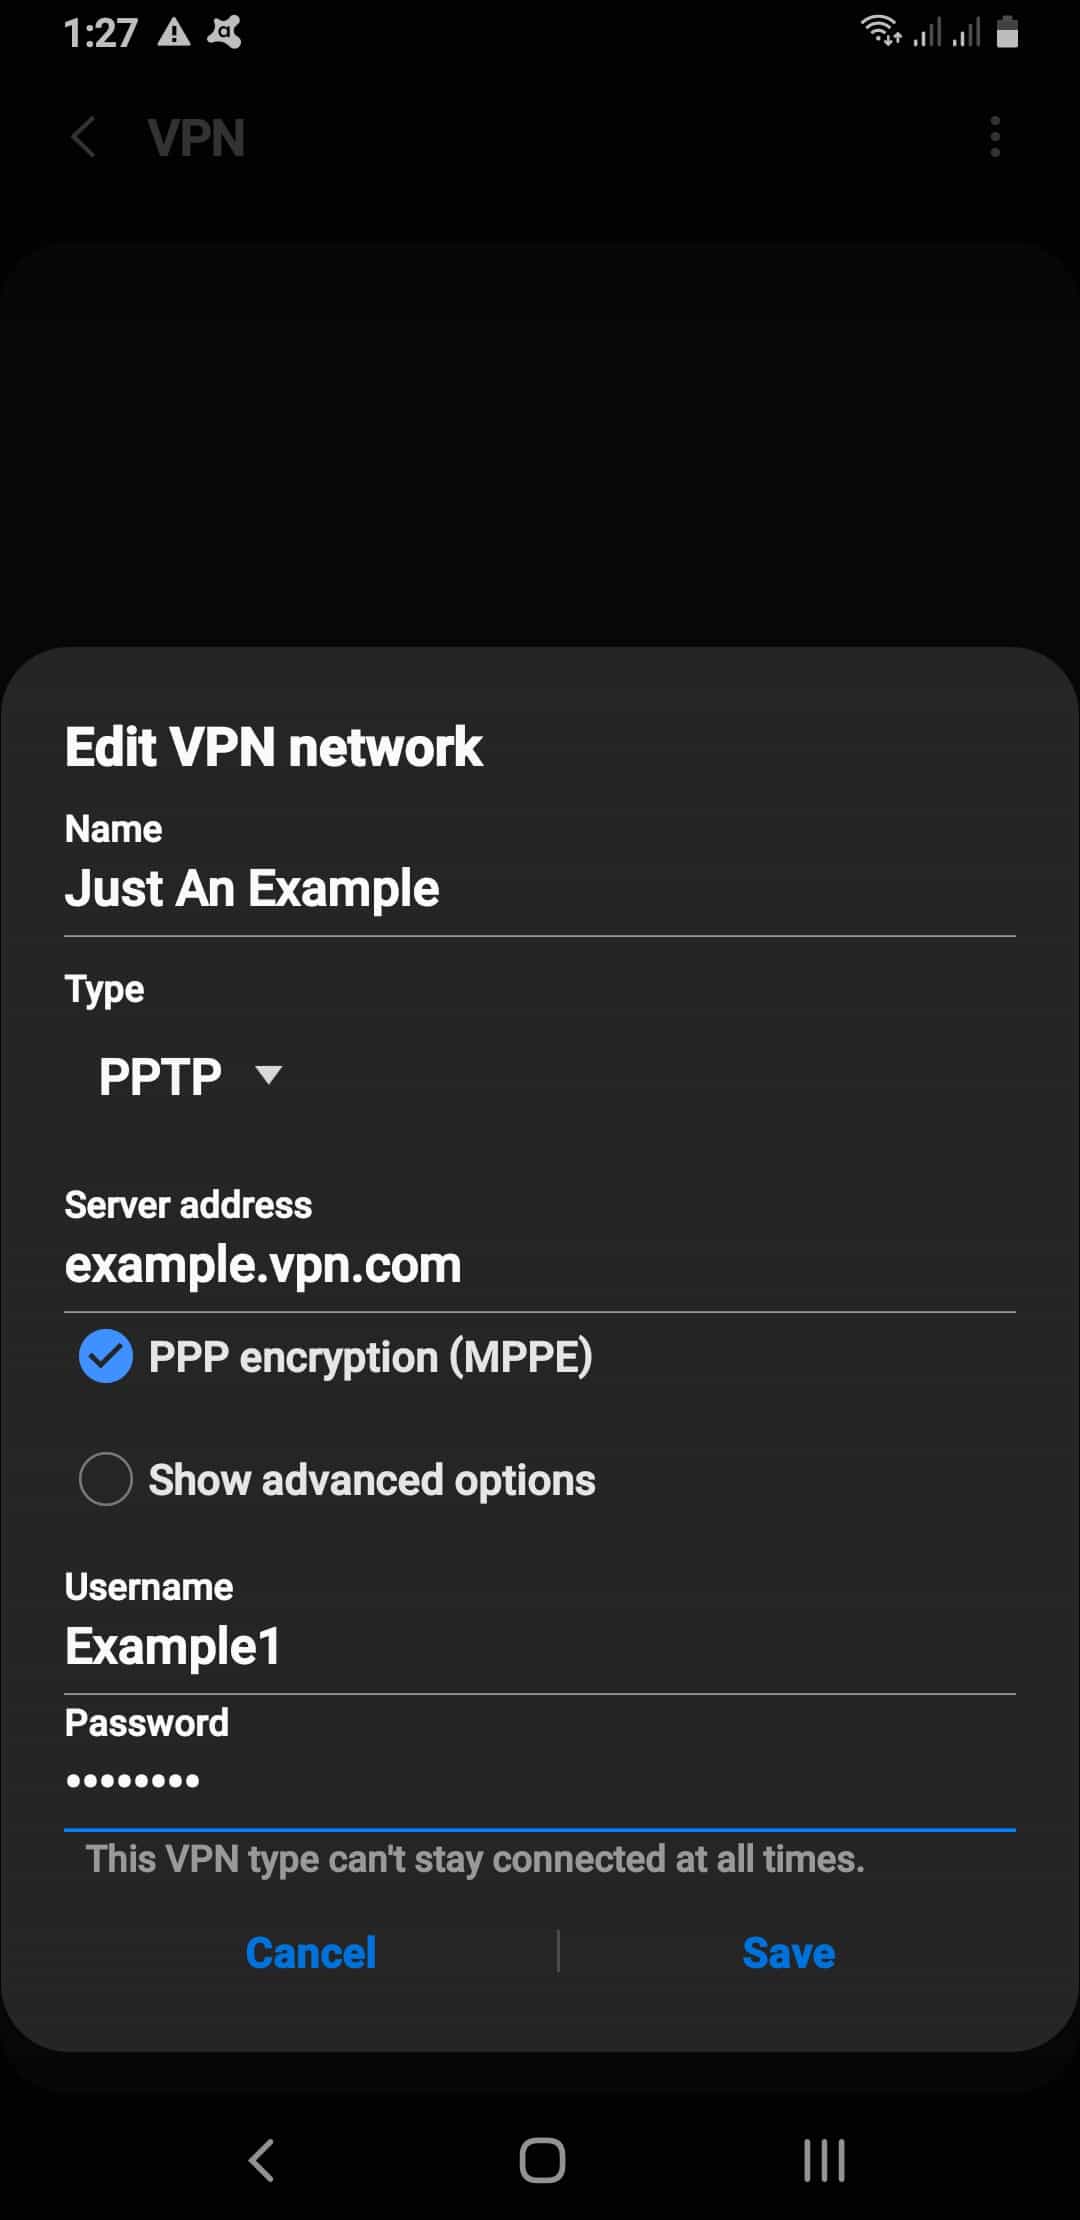 Setting Up A VPN From The Android Settings 